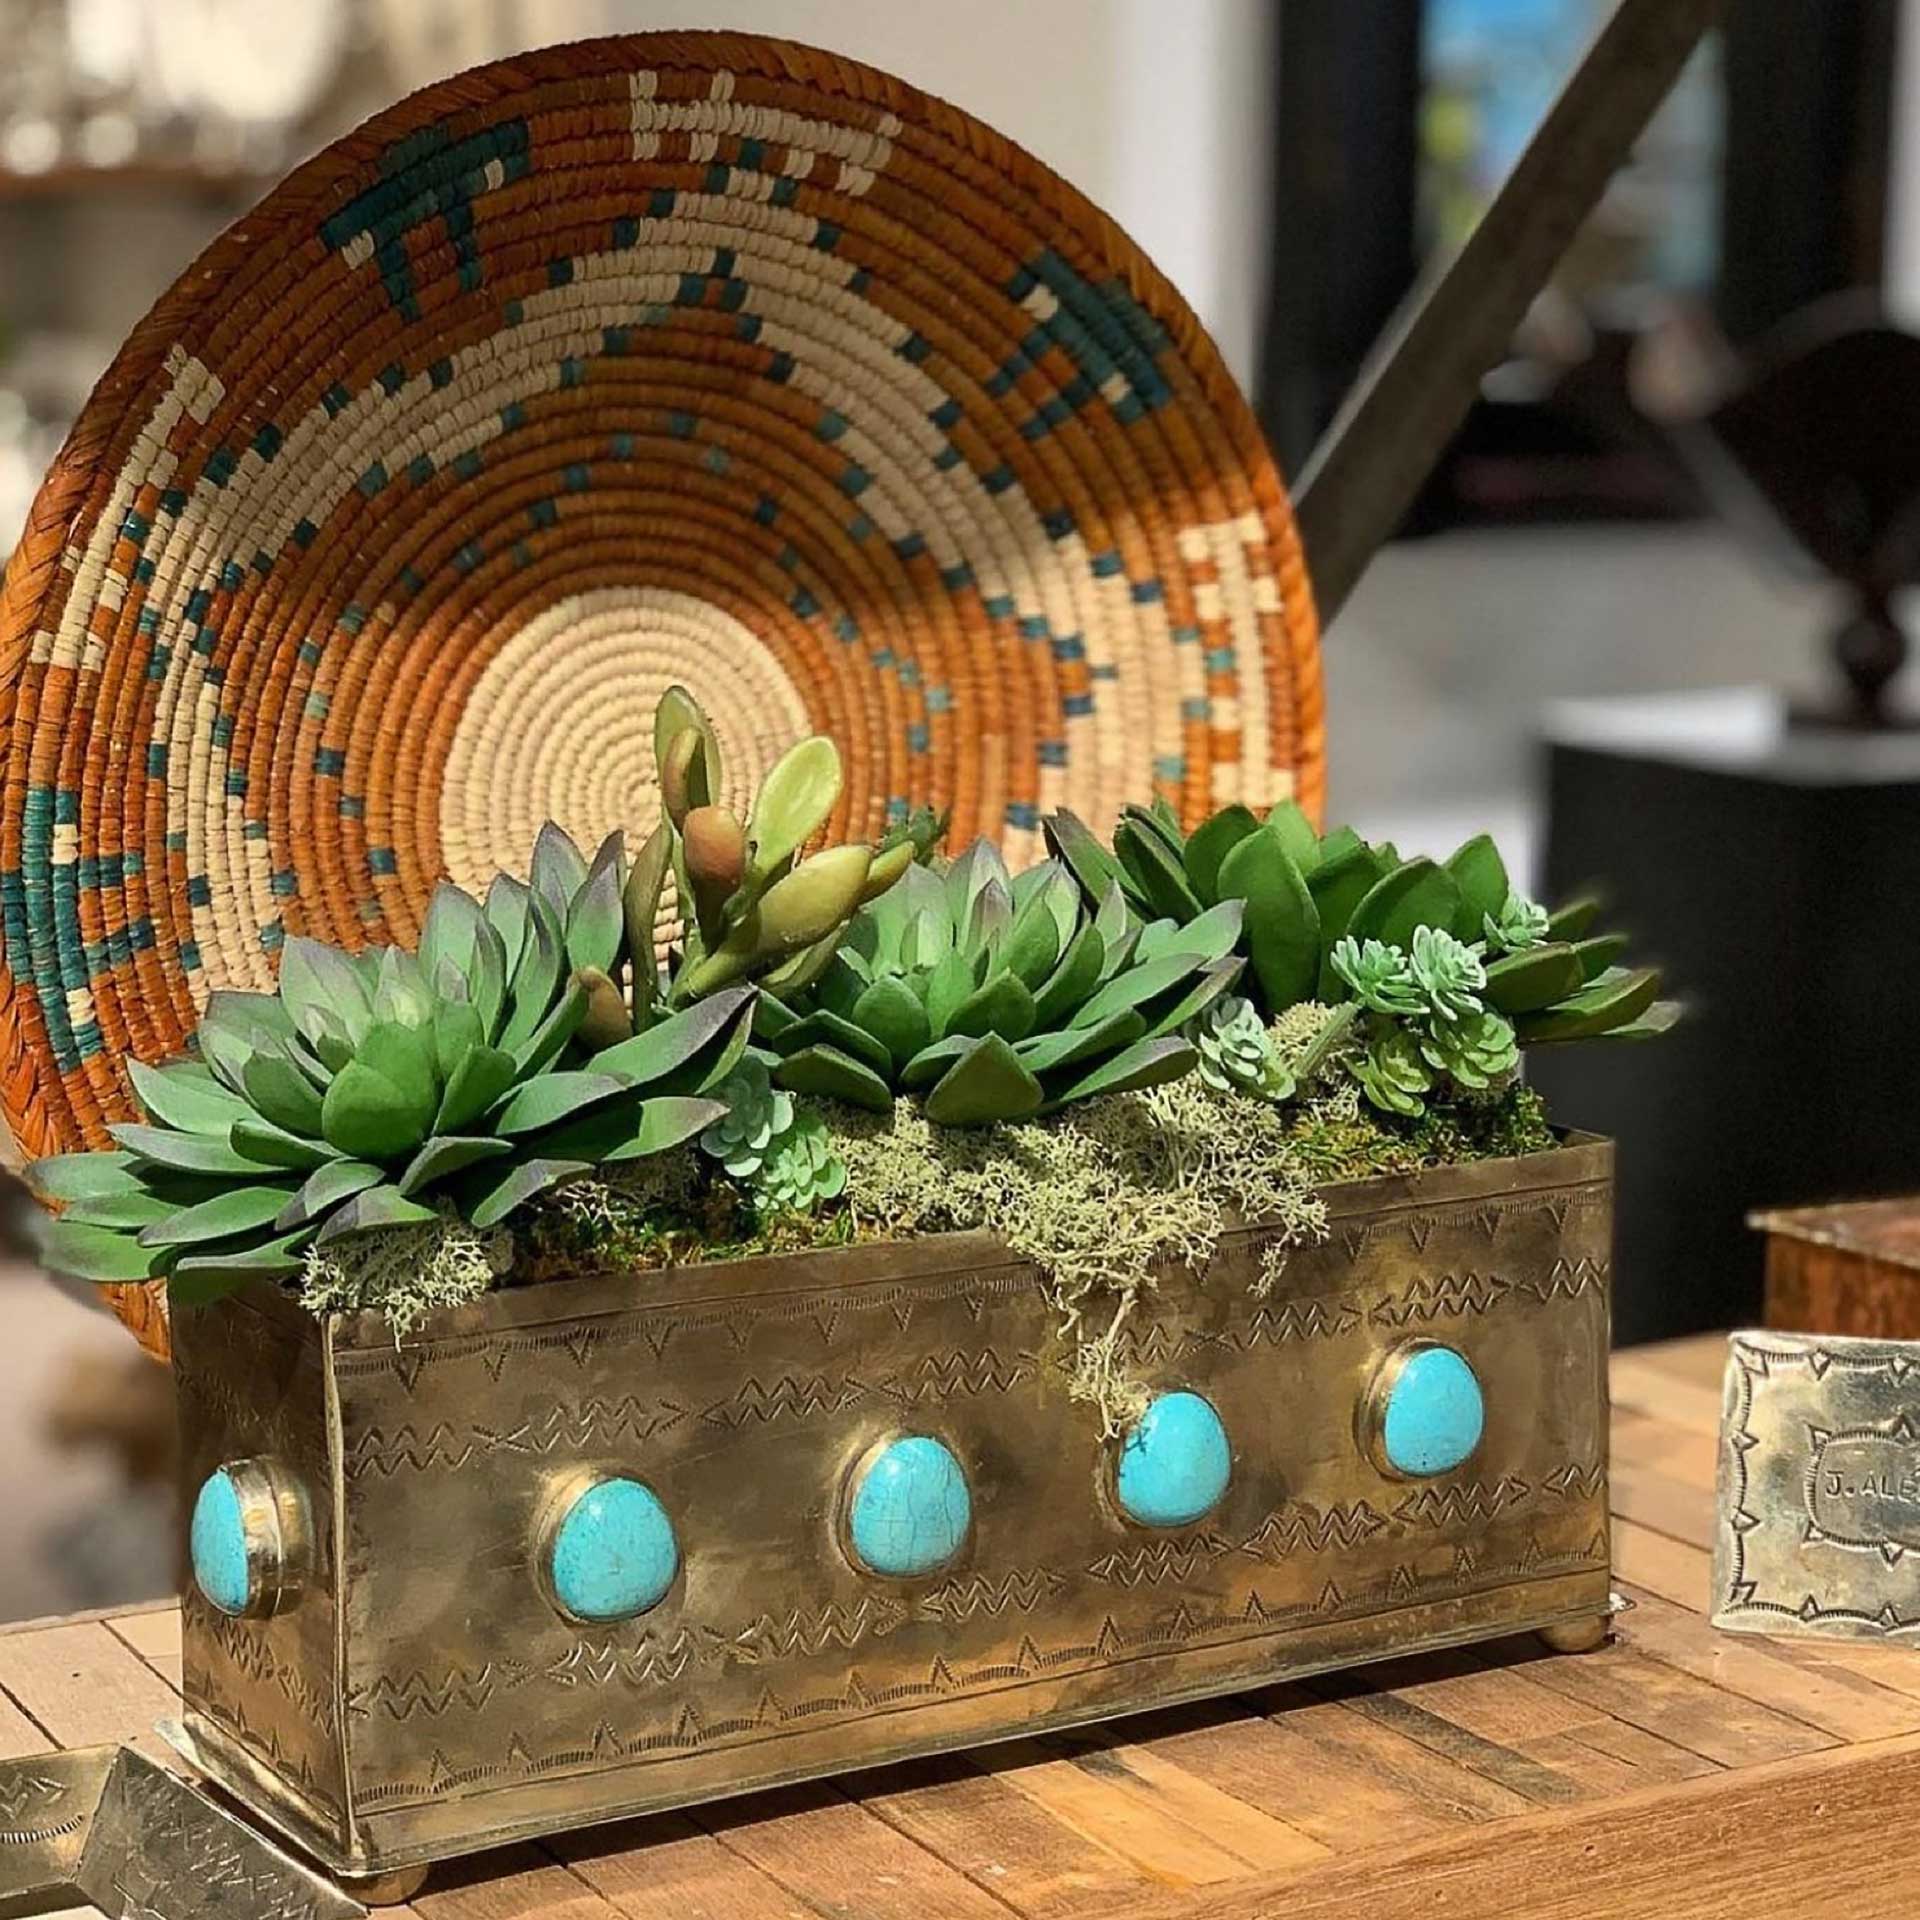 Sierra Stamped Planter With Turquoise